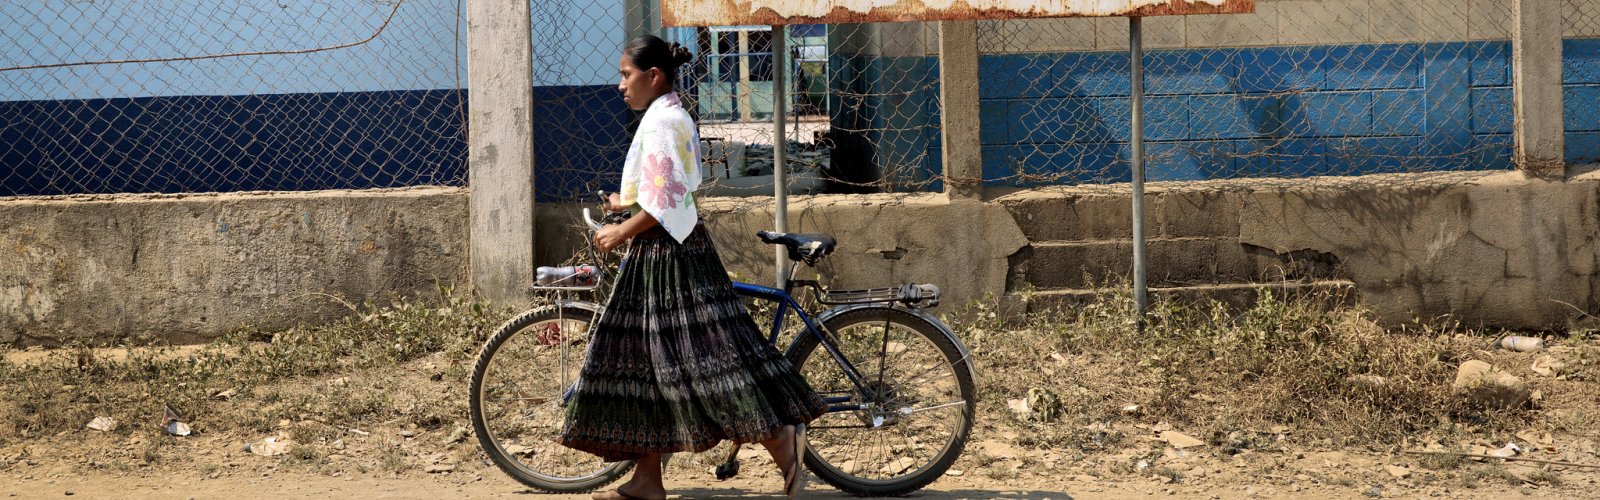 A Q'eqchi' woman with a bicycle walks down the unpaved main road through Sepur Zarco.